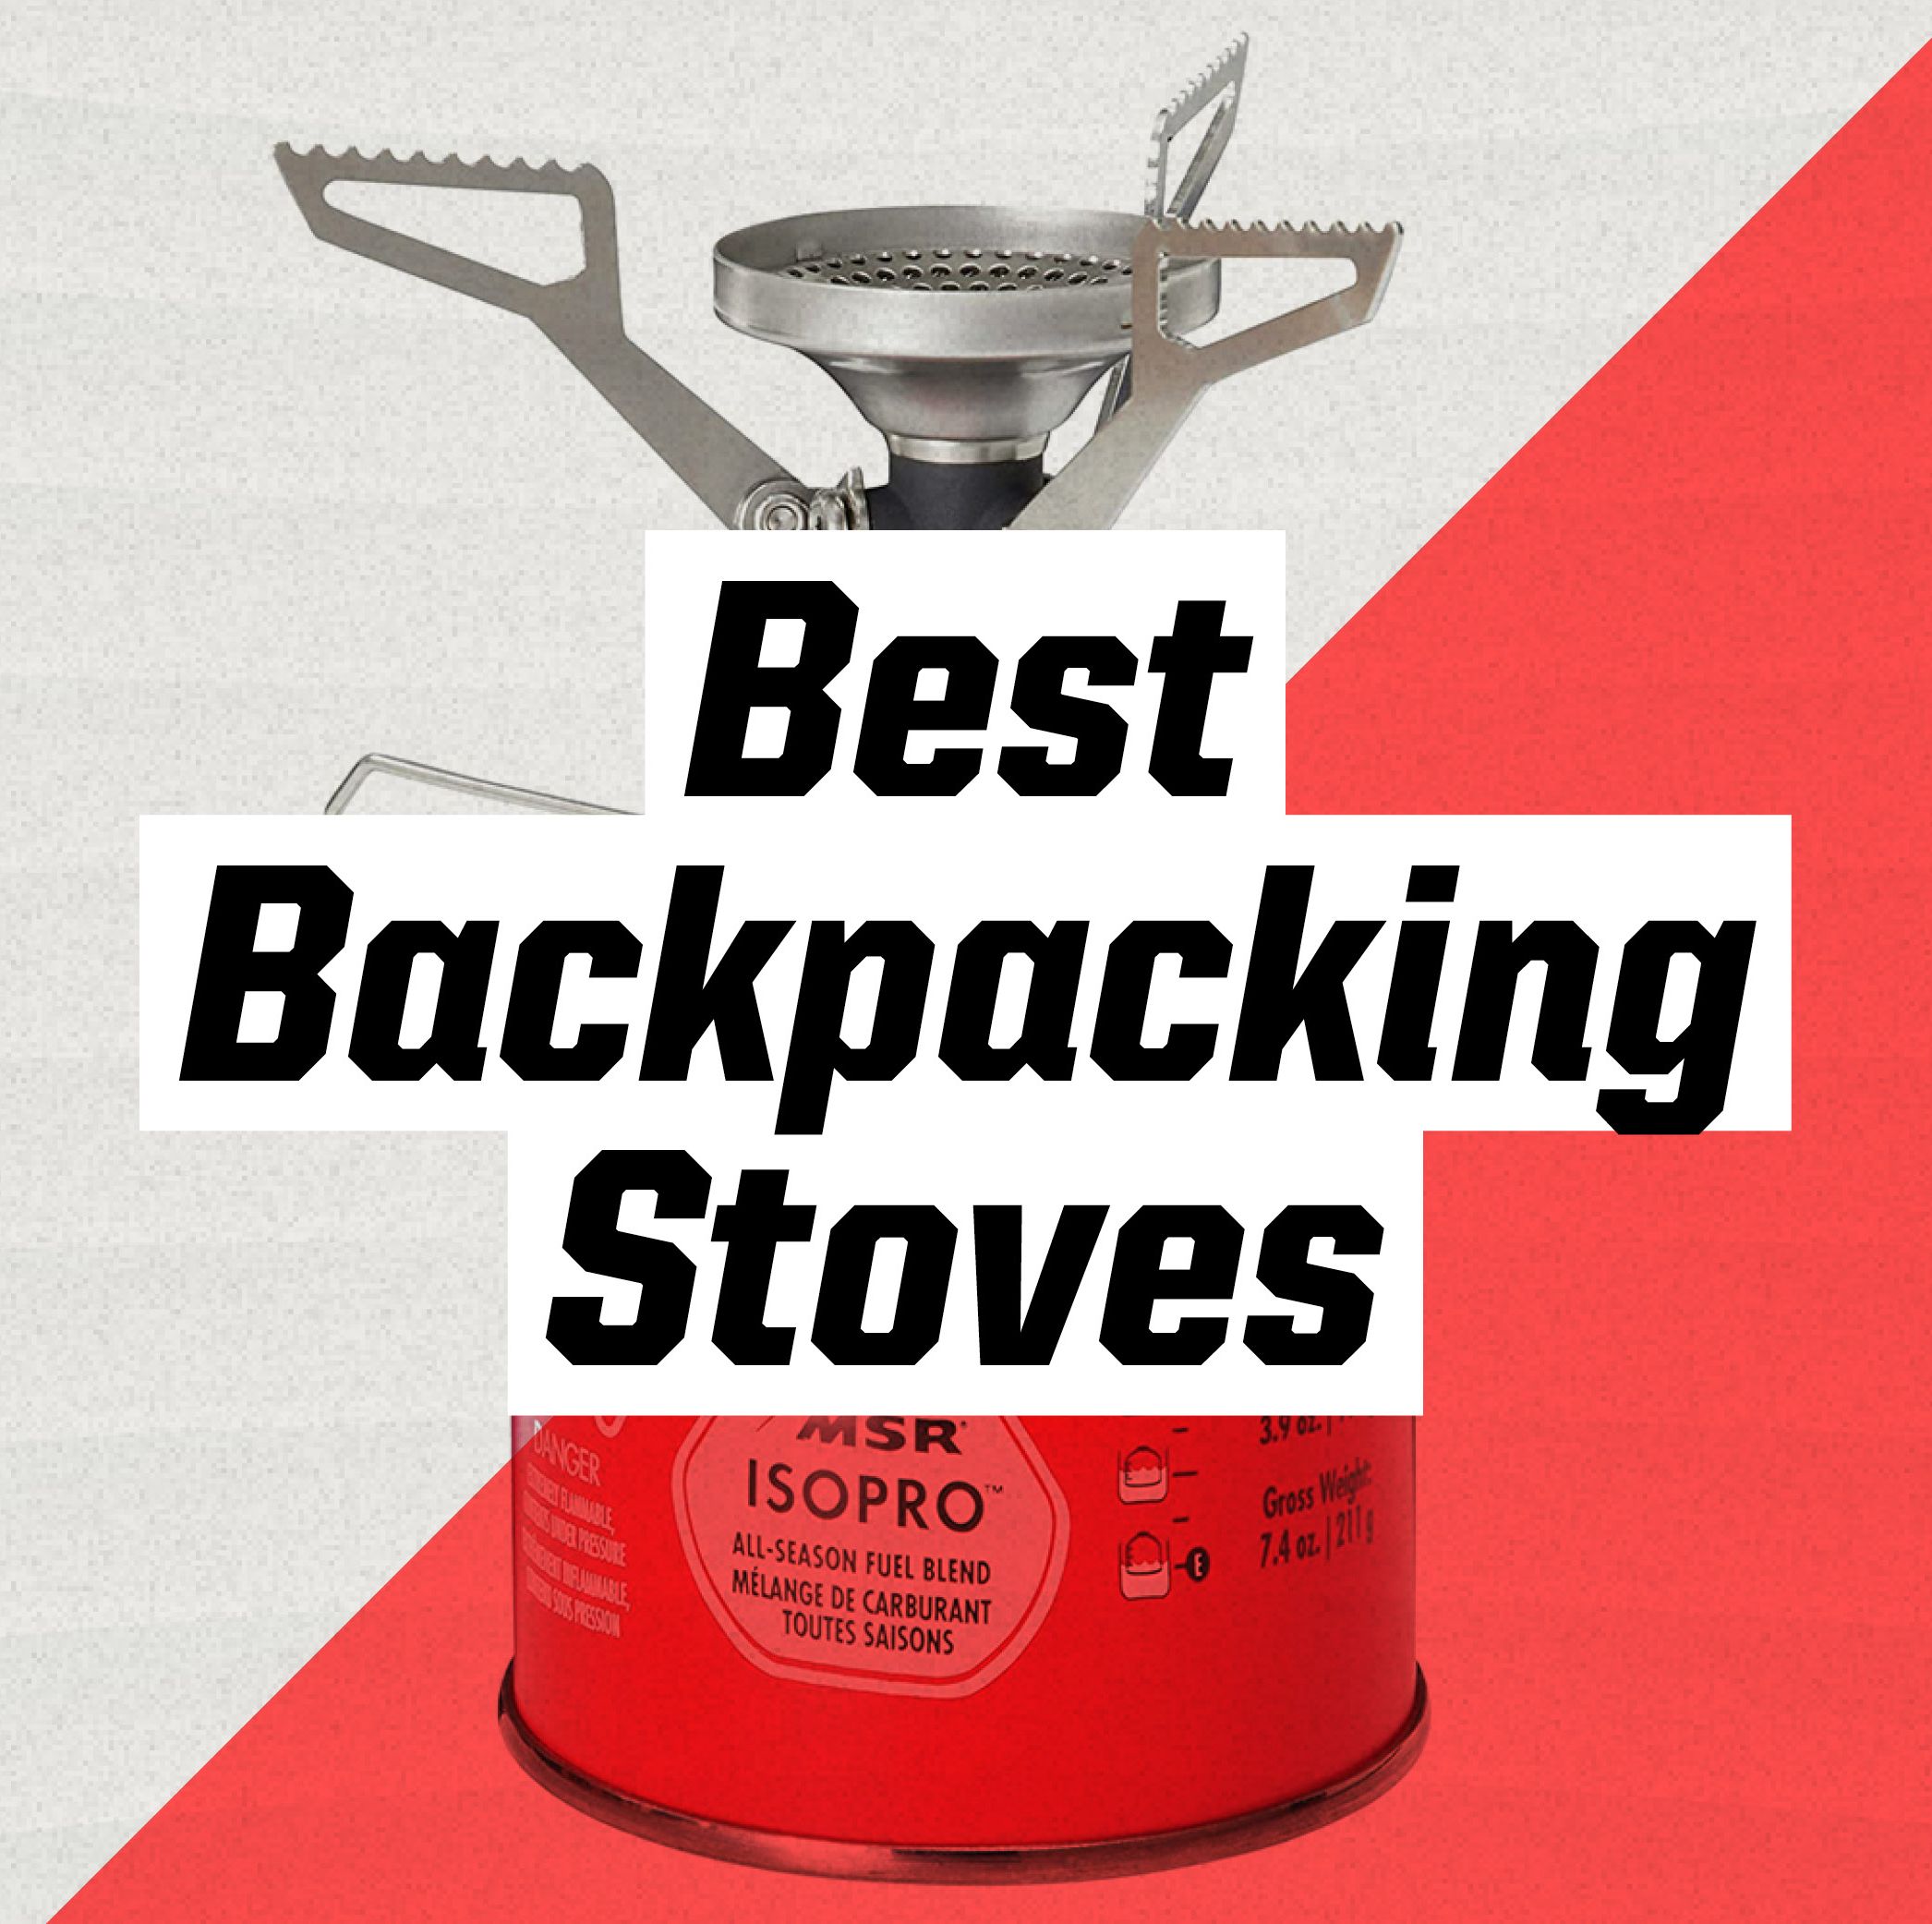 The Best Backpacking Stoves